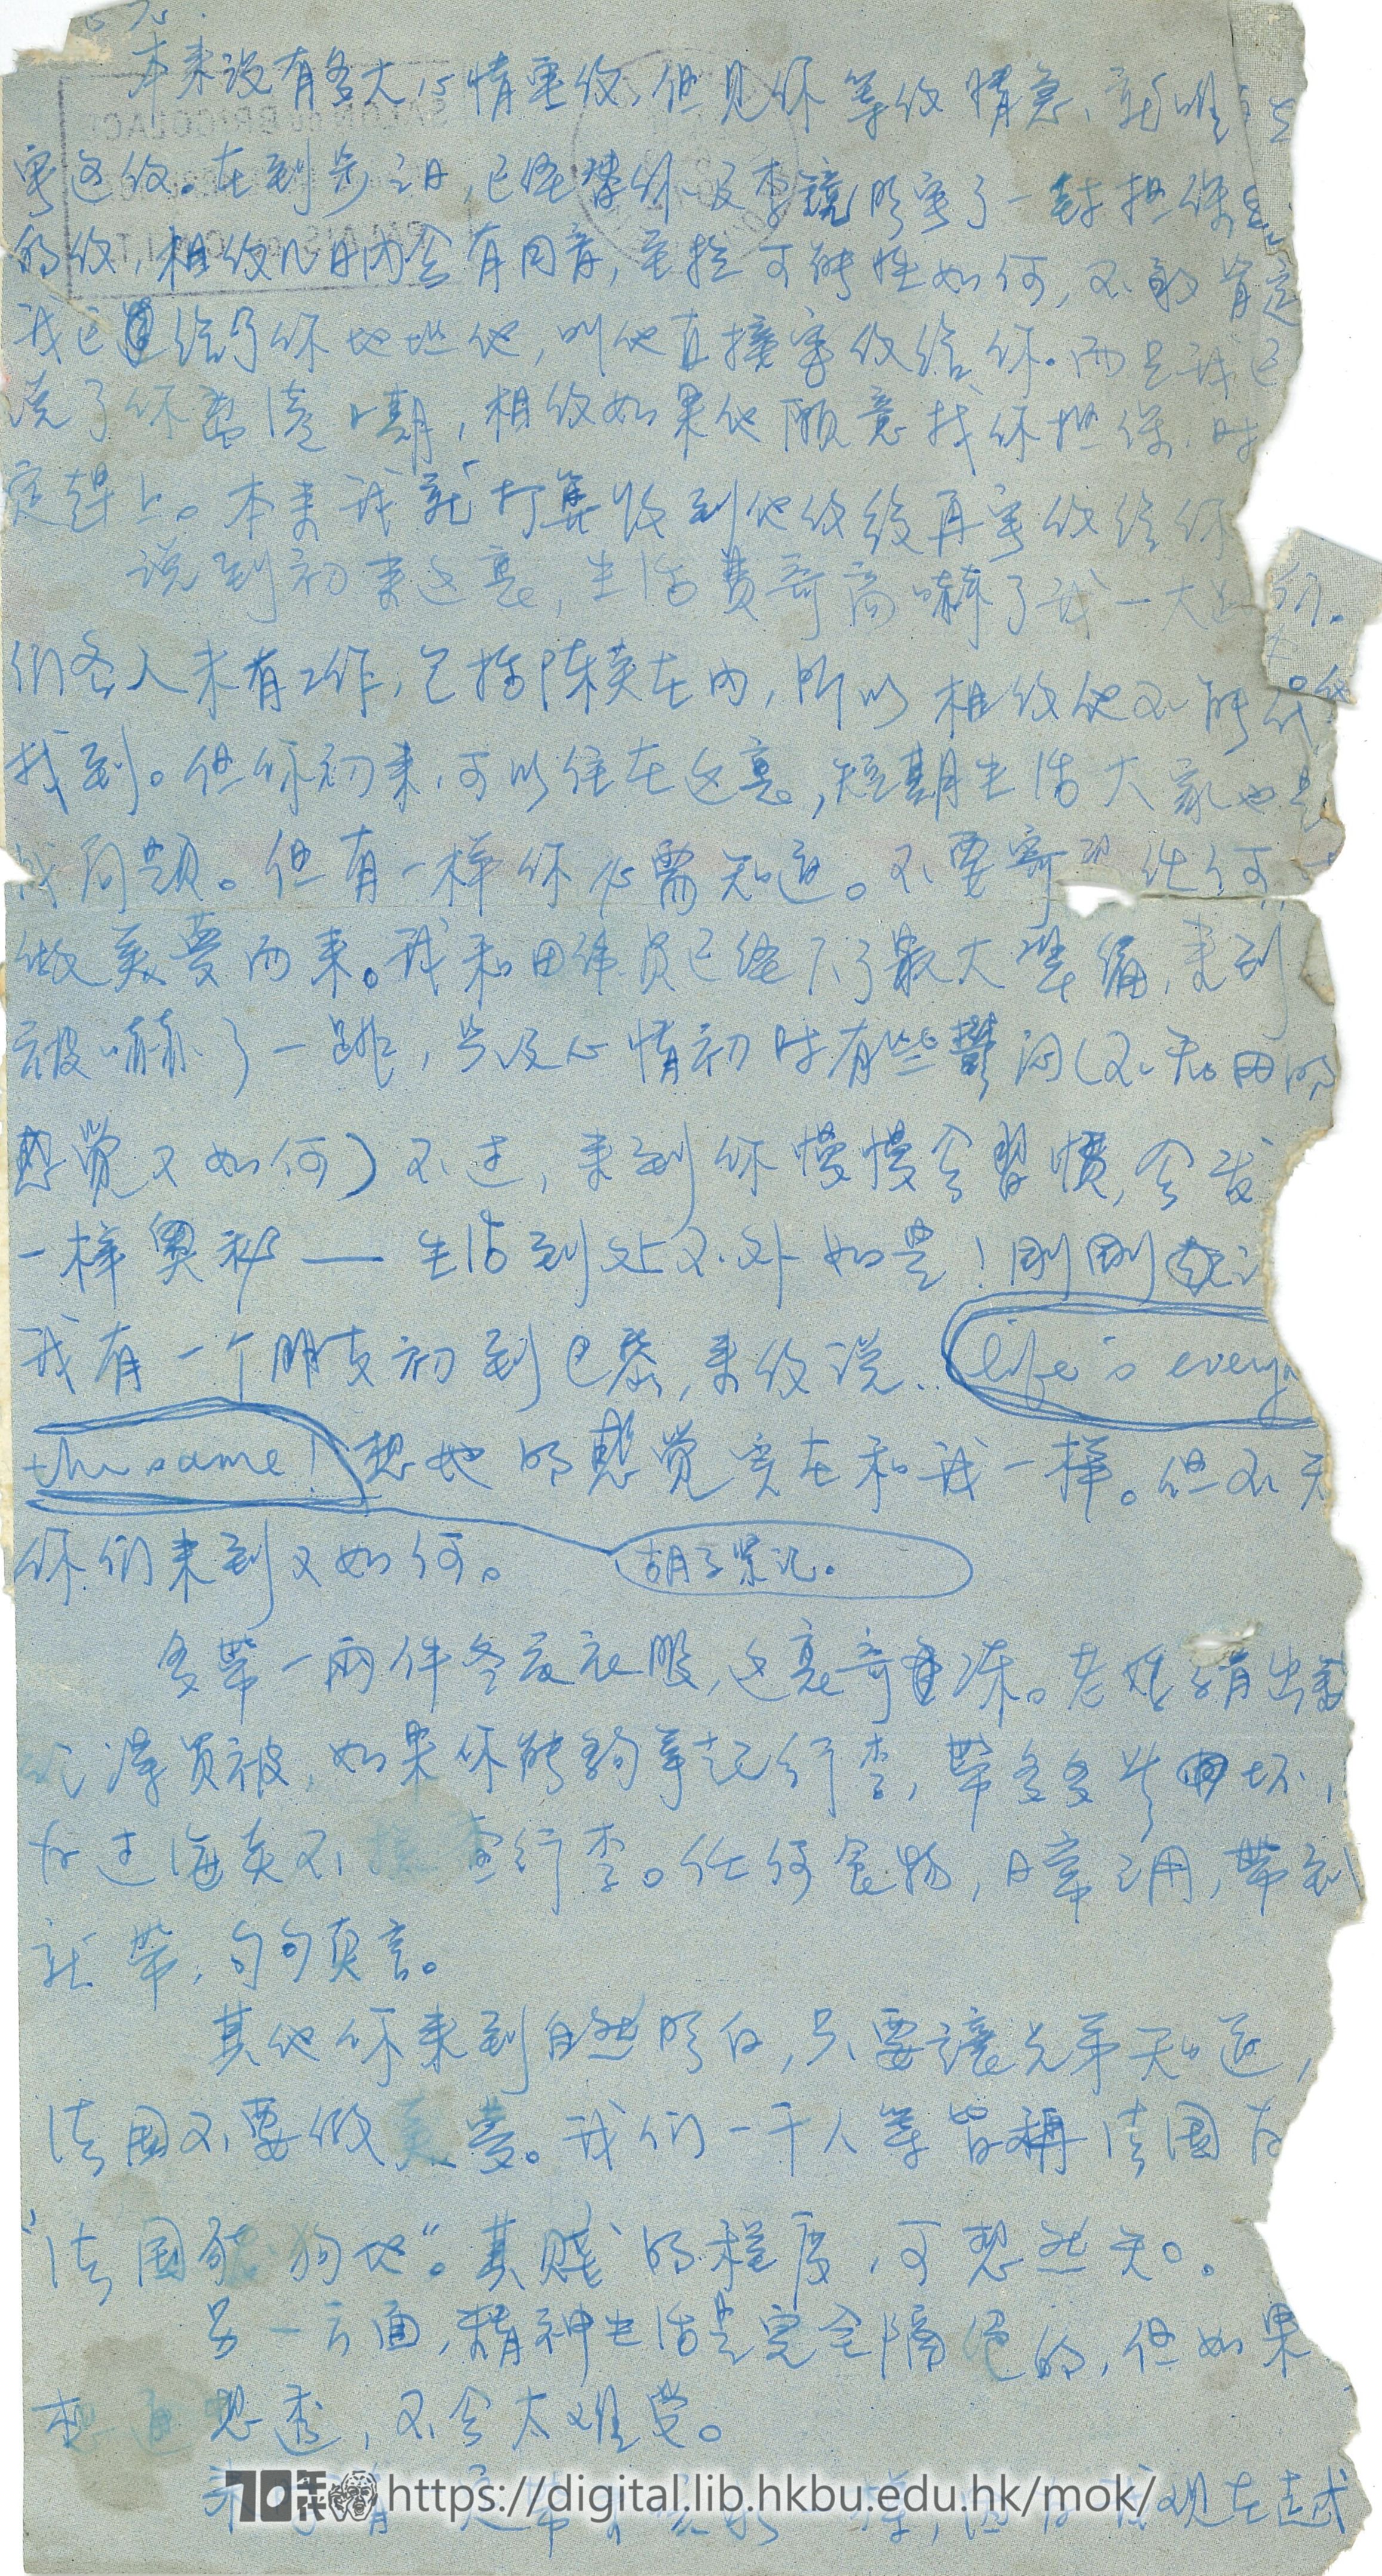   Letter from Lee Kam-fung to Ng Ka-lun 李美鳳 